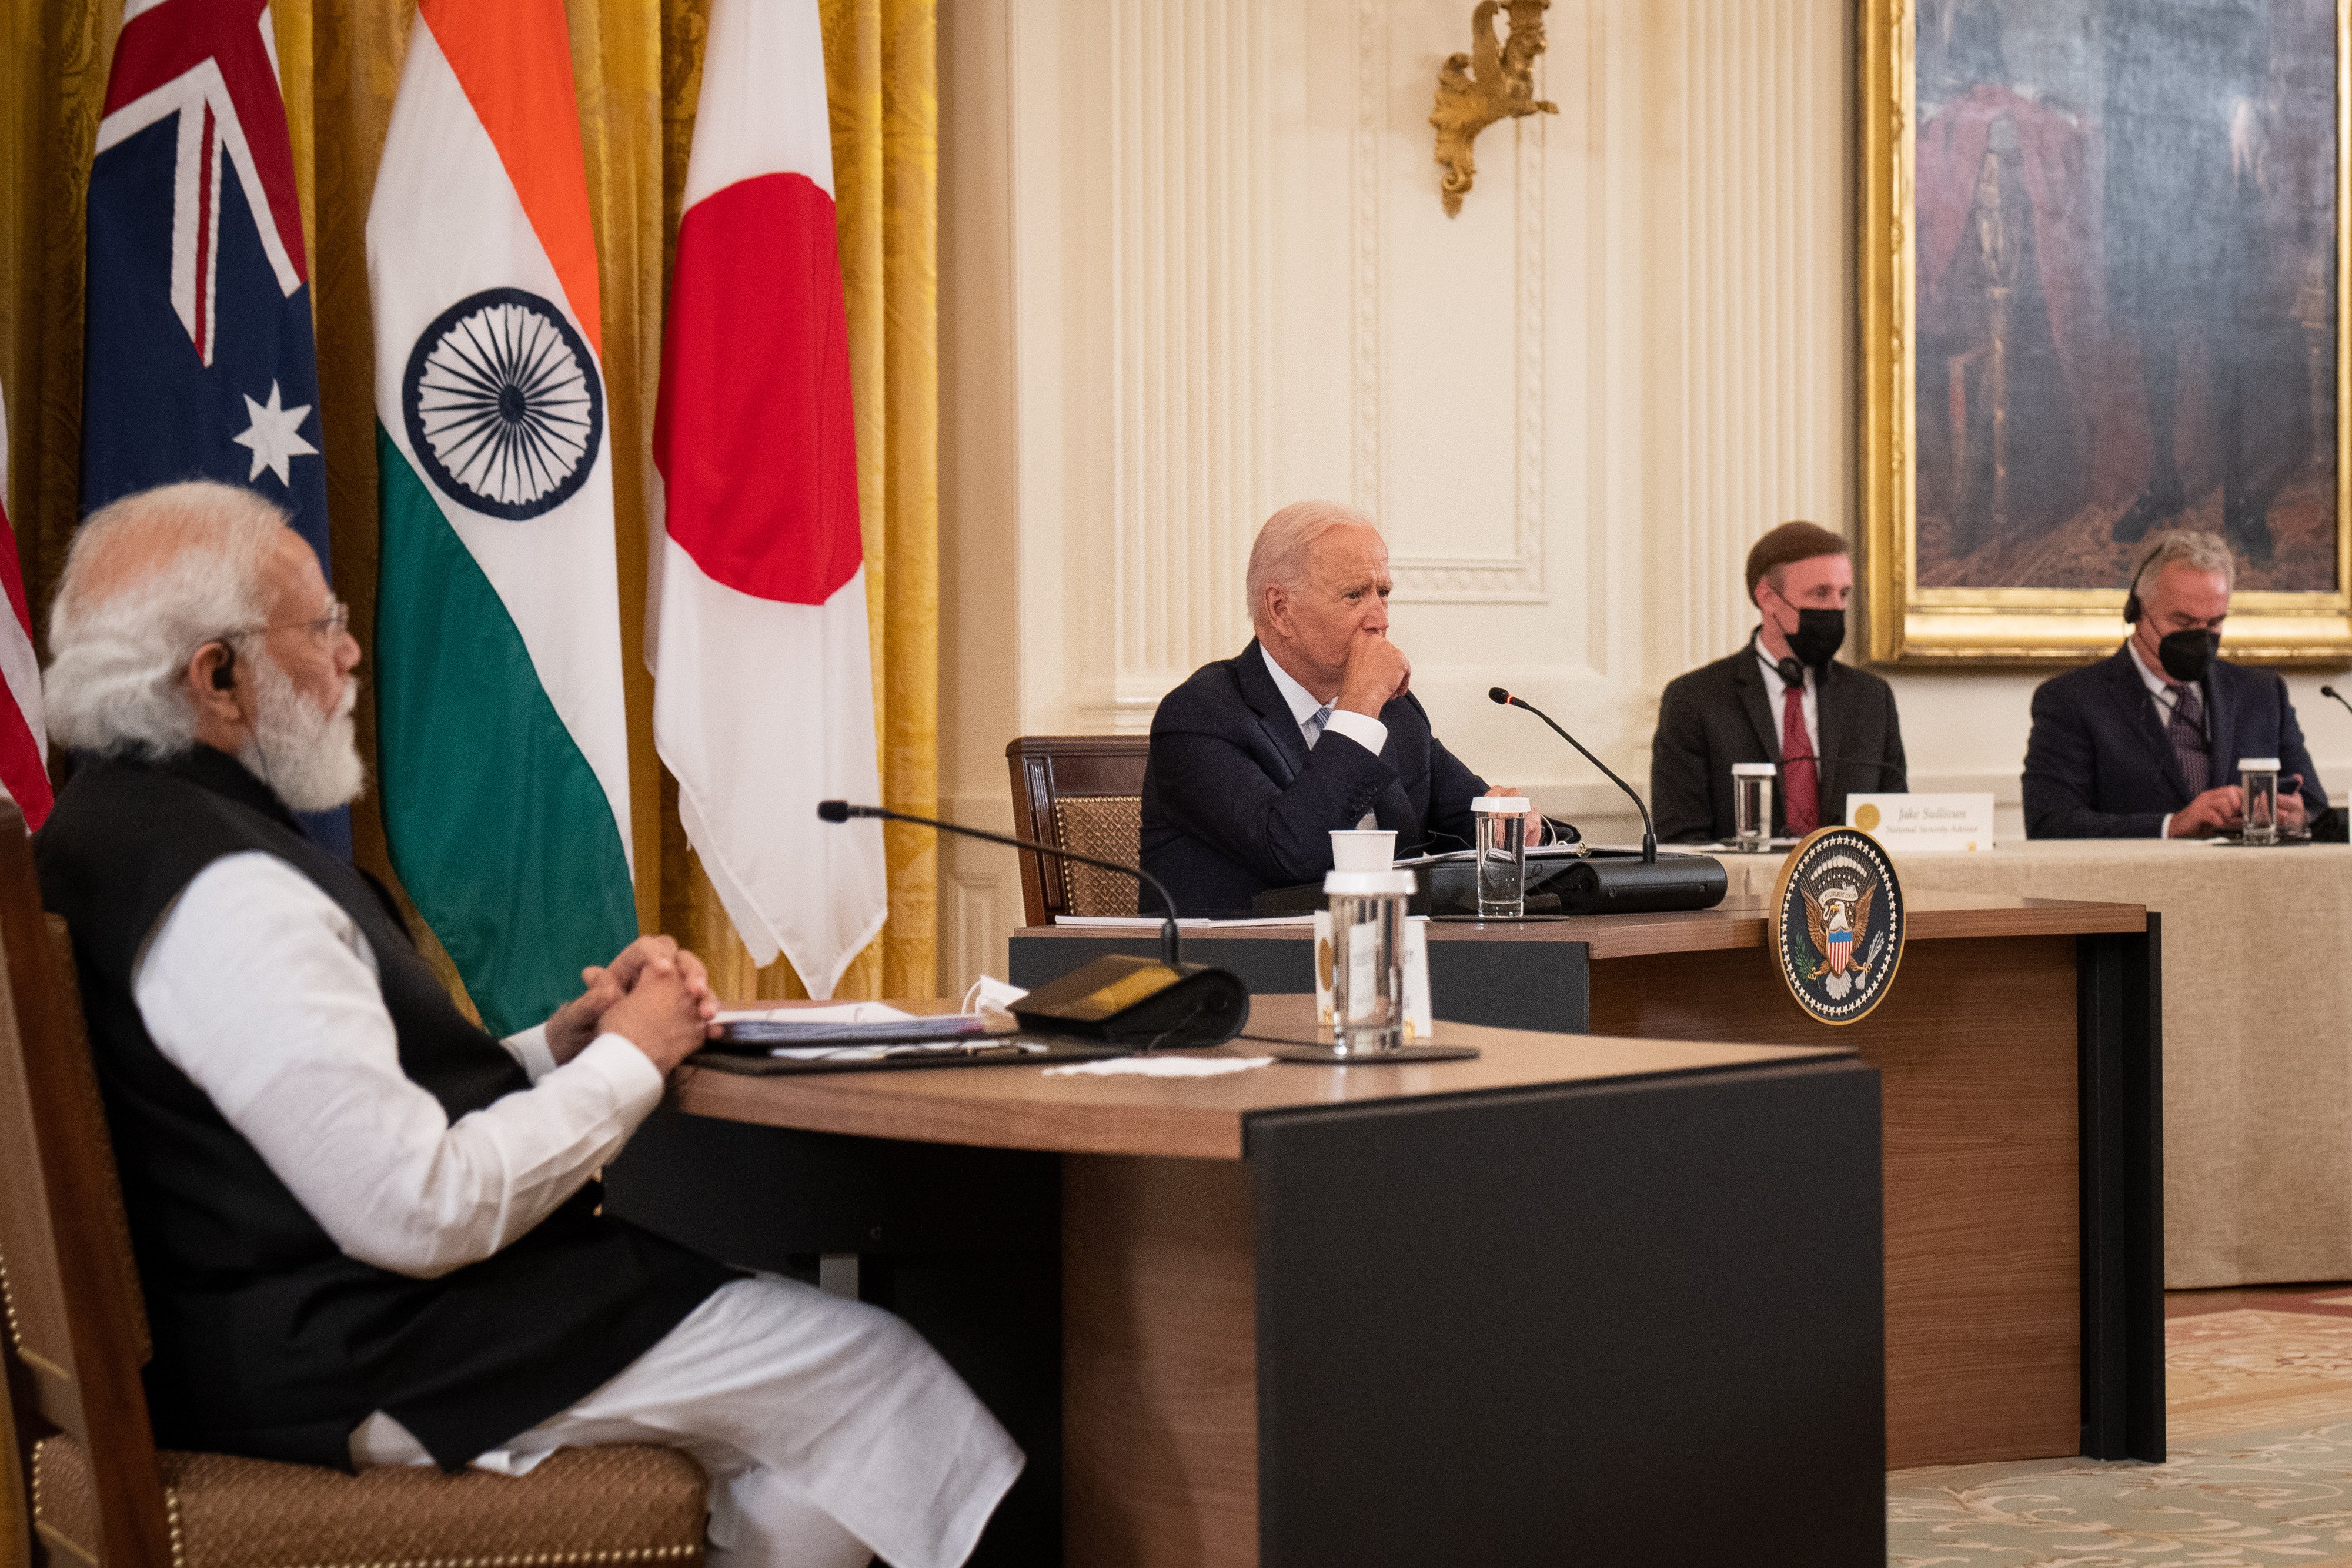 Indian Prime Minister Narendra Modi (left) attends a meeting with US President Joe Biden (centre) and other officials in the East Room of the White House in Washington on September 24. Modi, Biden and other members of the Quad unveiled a series of initiatives aimed at counteracting Chinese influence across the Pacific. Photo: Bloomberg